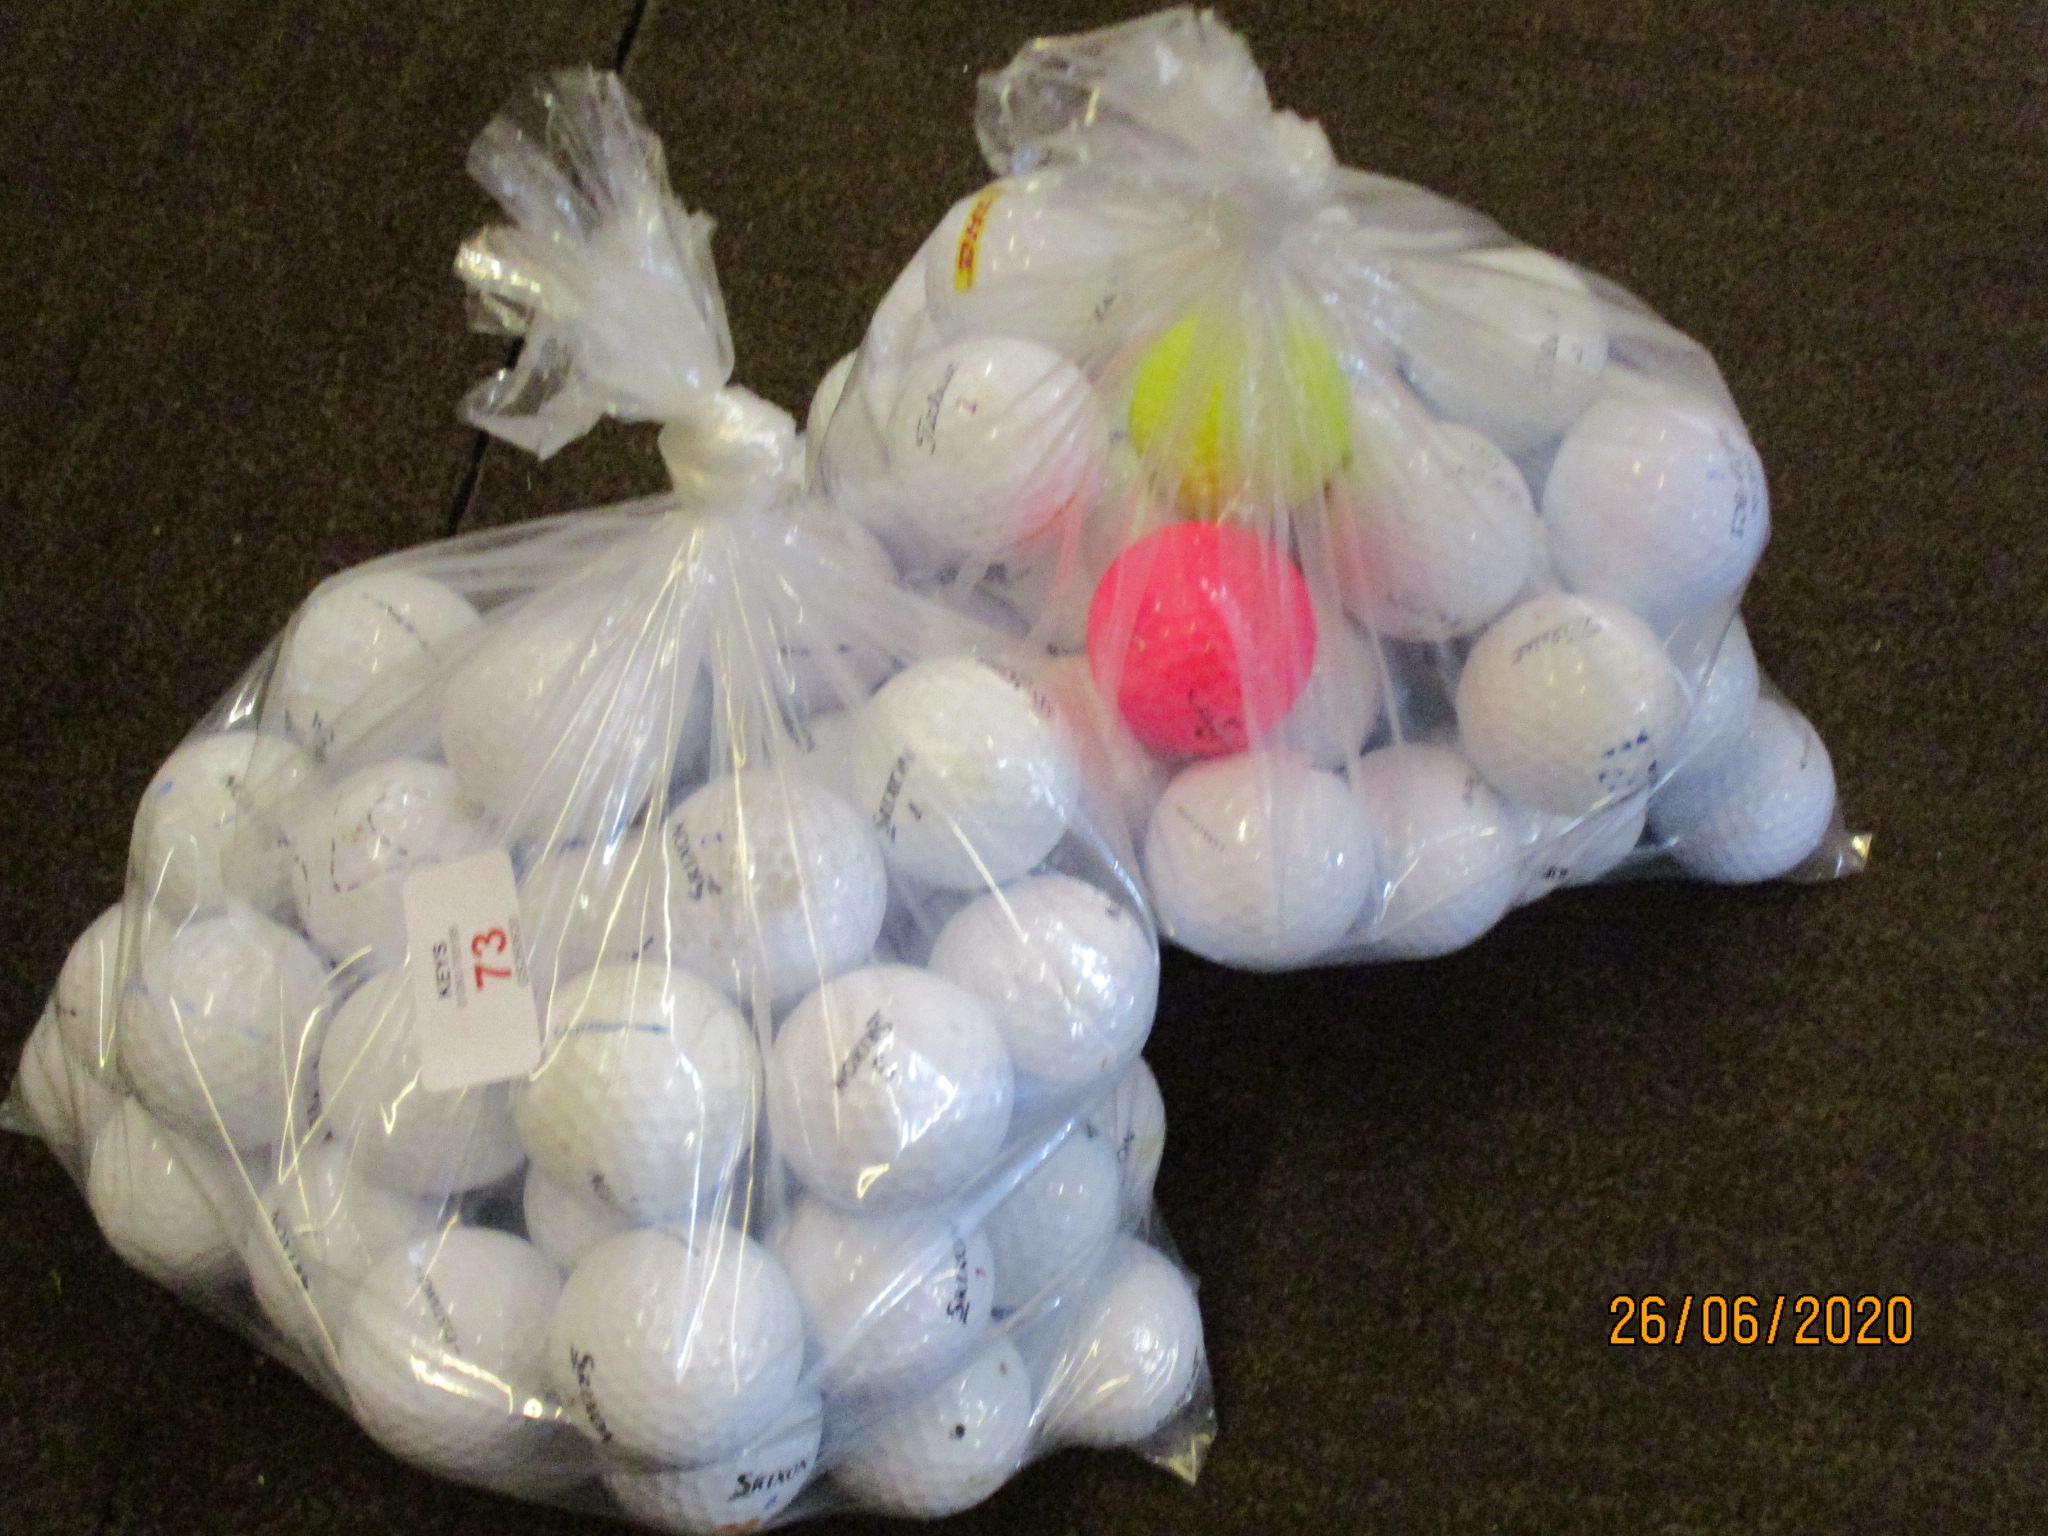 Two bags containing approx 100 golf balls